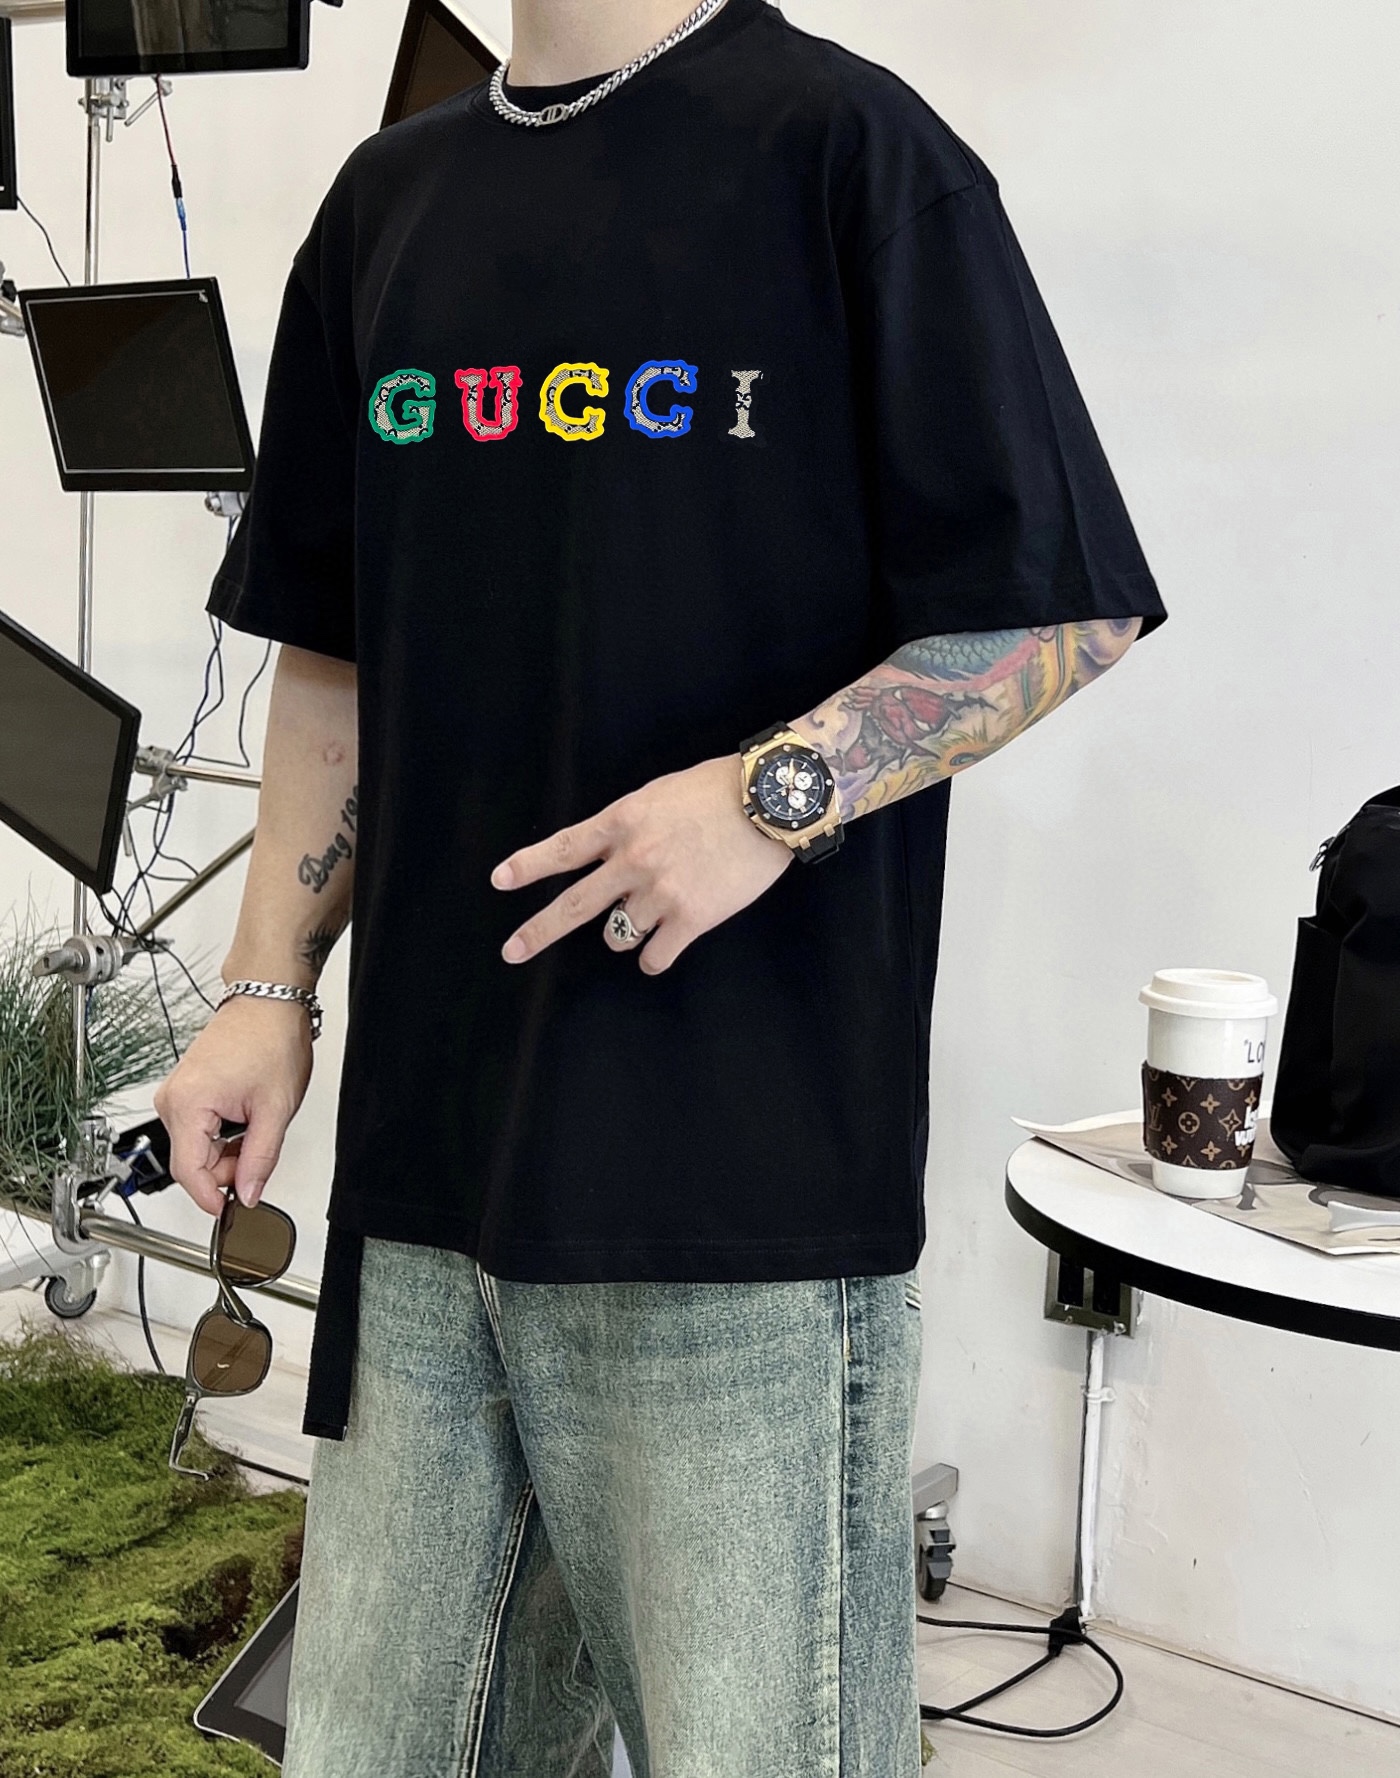 Gucci Clothing T-Shirt Cotton Spring/Summer Collection Fashion Short Sleeve